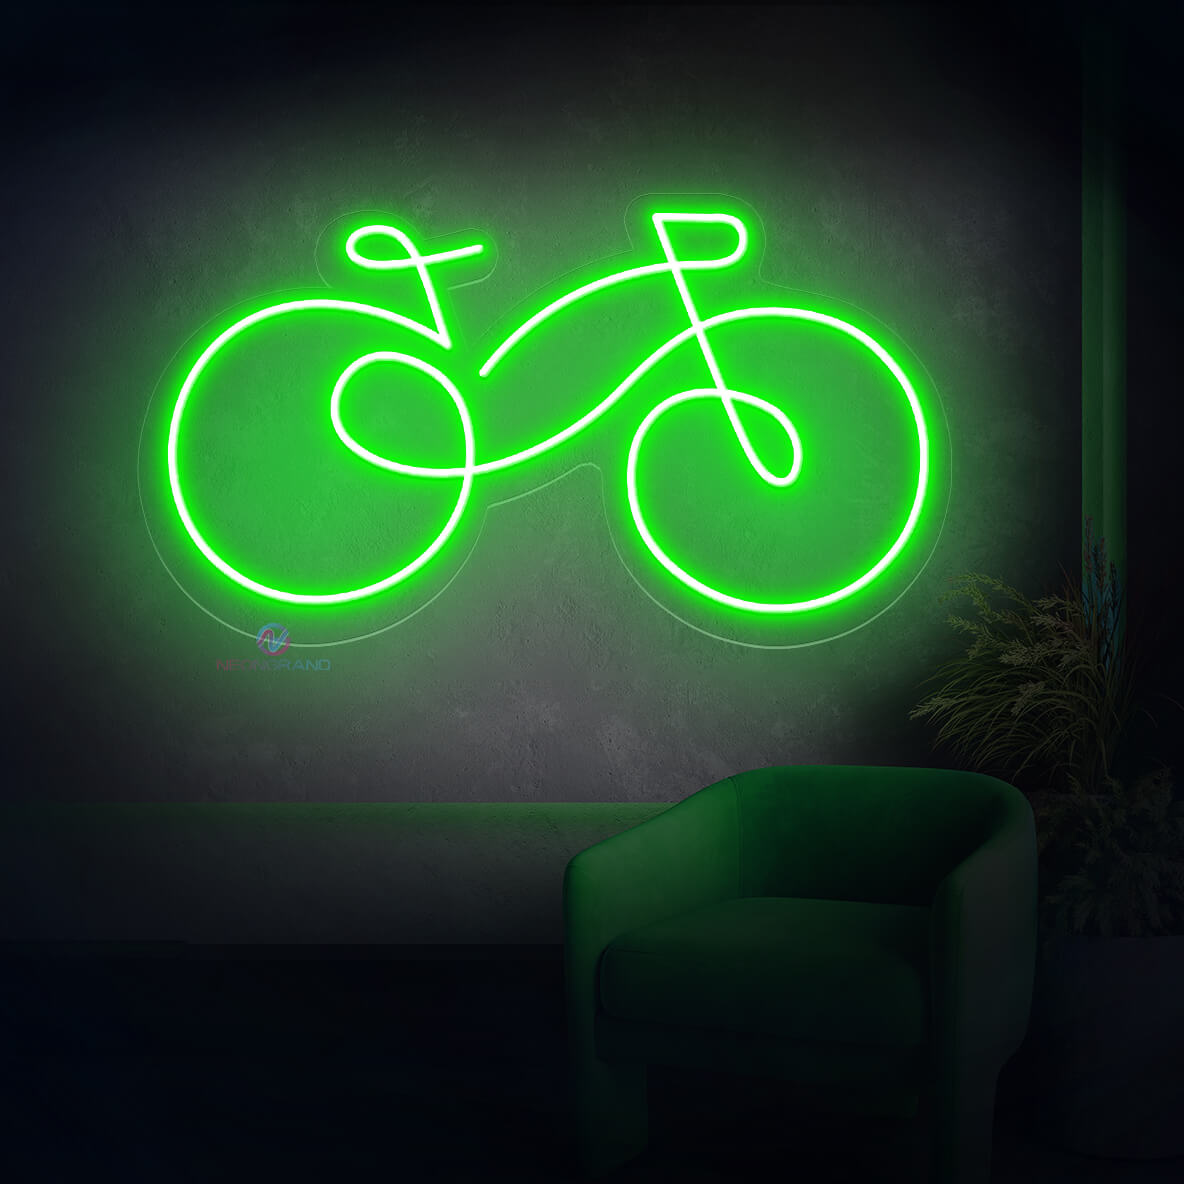 Neon Bicycle Light Sign Bike Led Light Cool Neon Signs